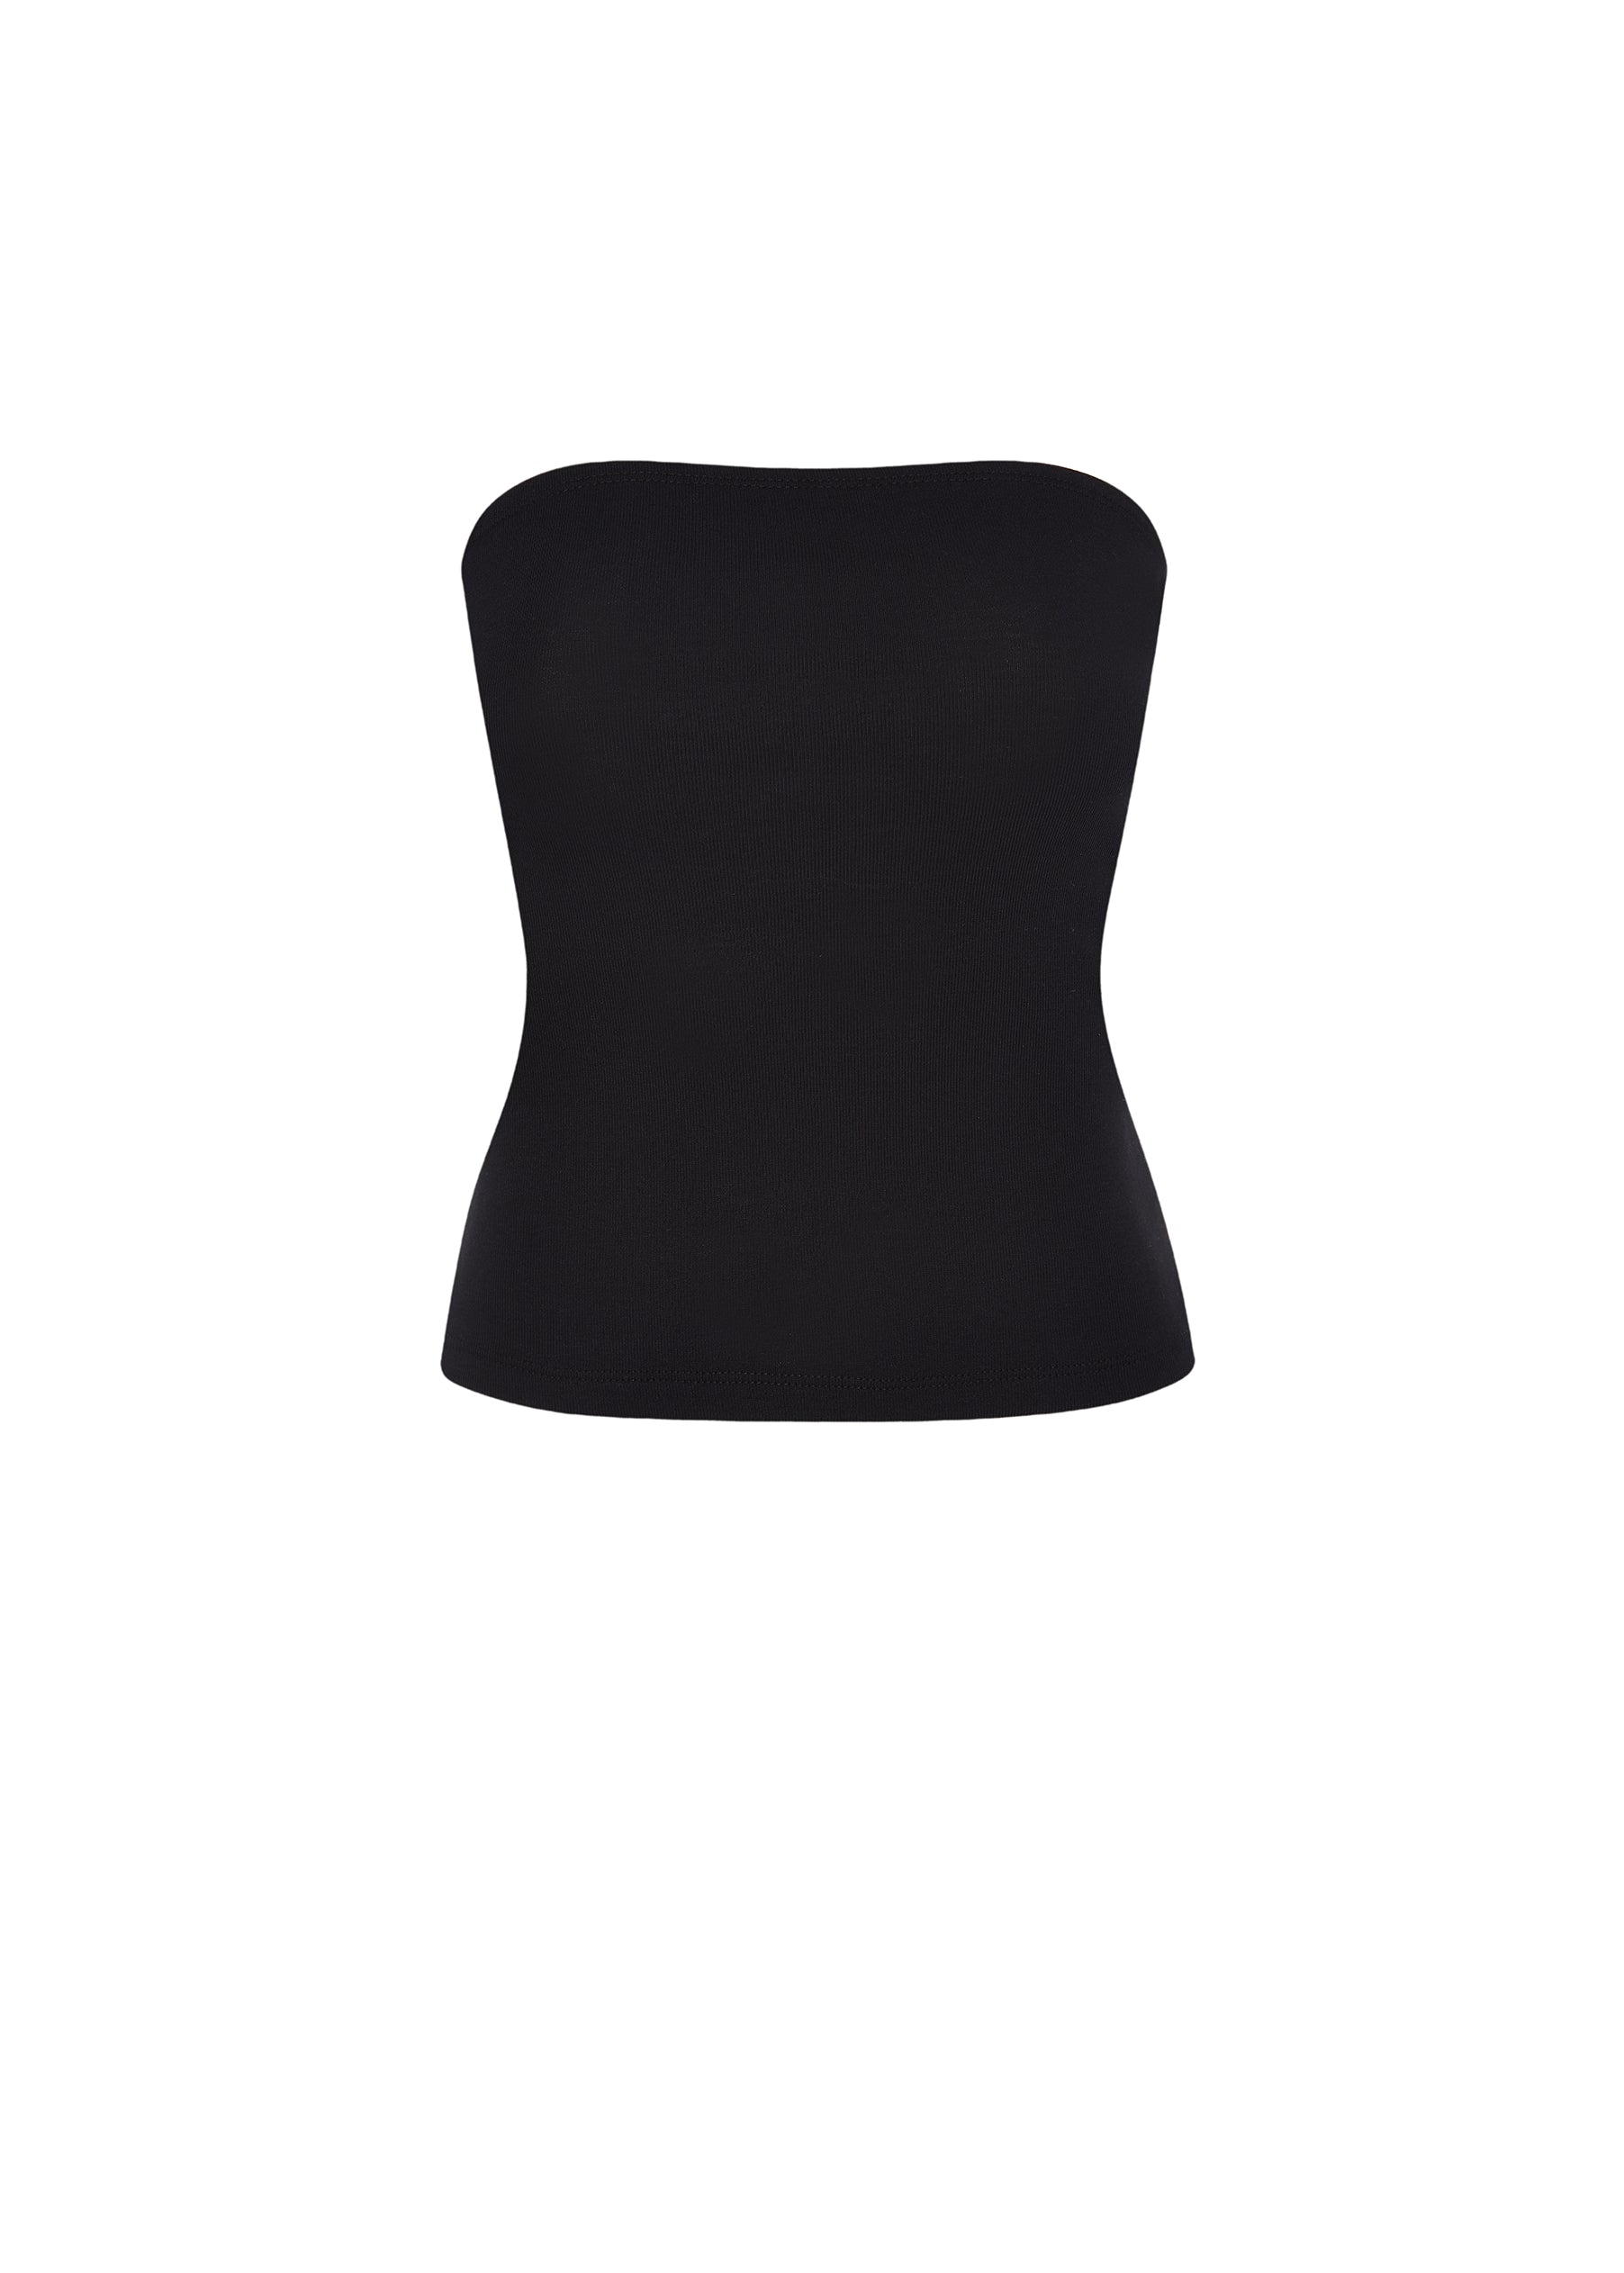 The Tube Top: Cotton Jersey Black